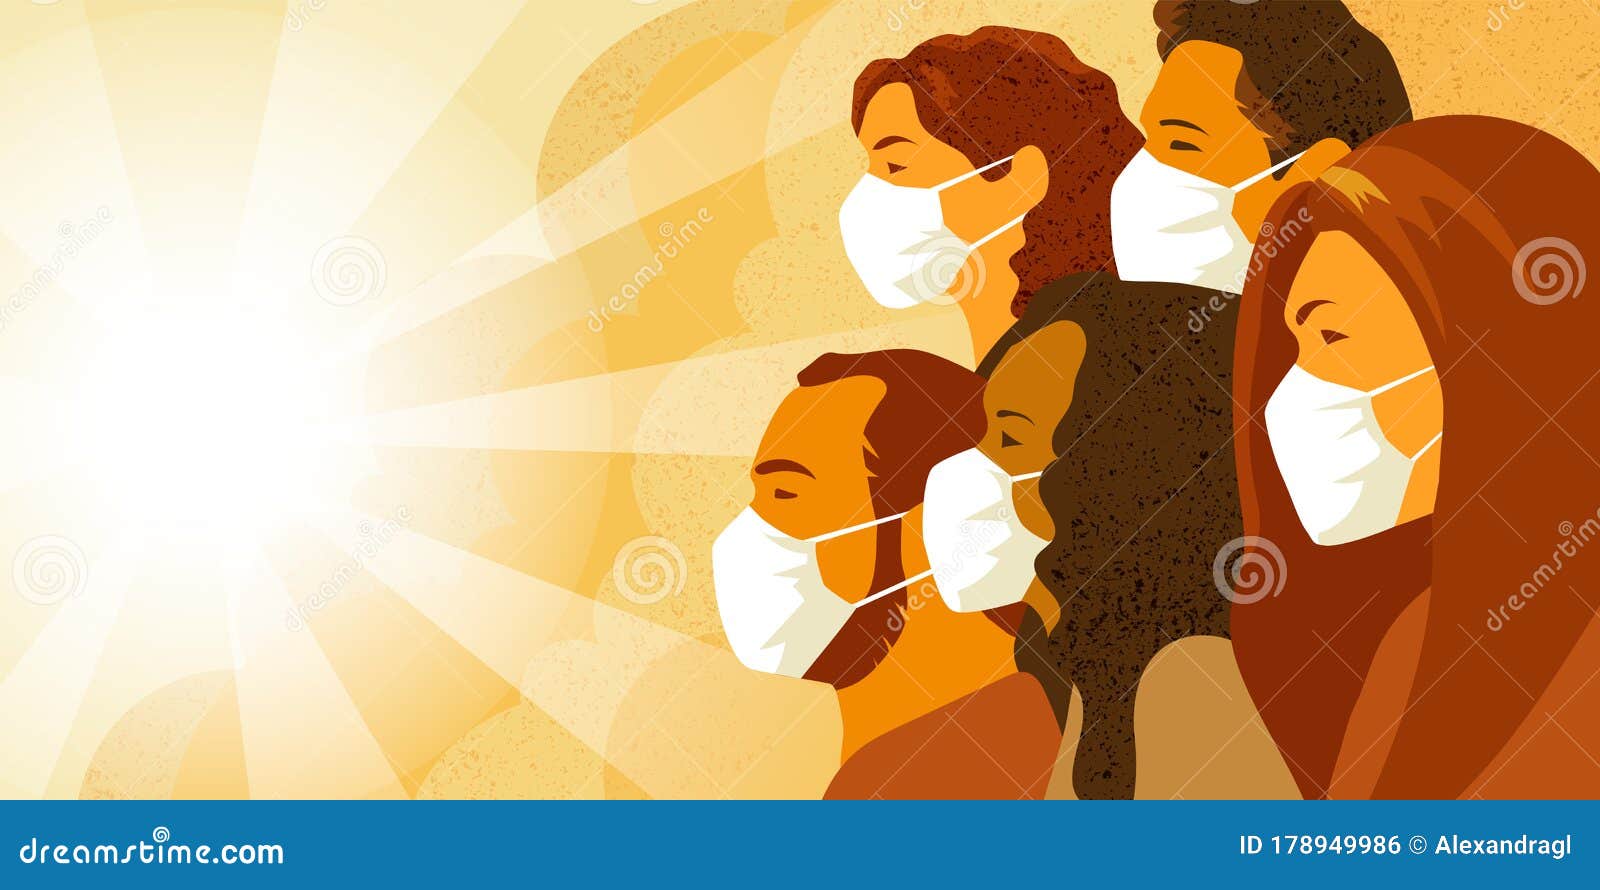 coronavirus covid-19 pandemia concept. group of people in medical mask